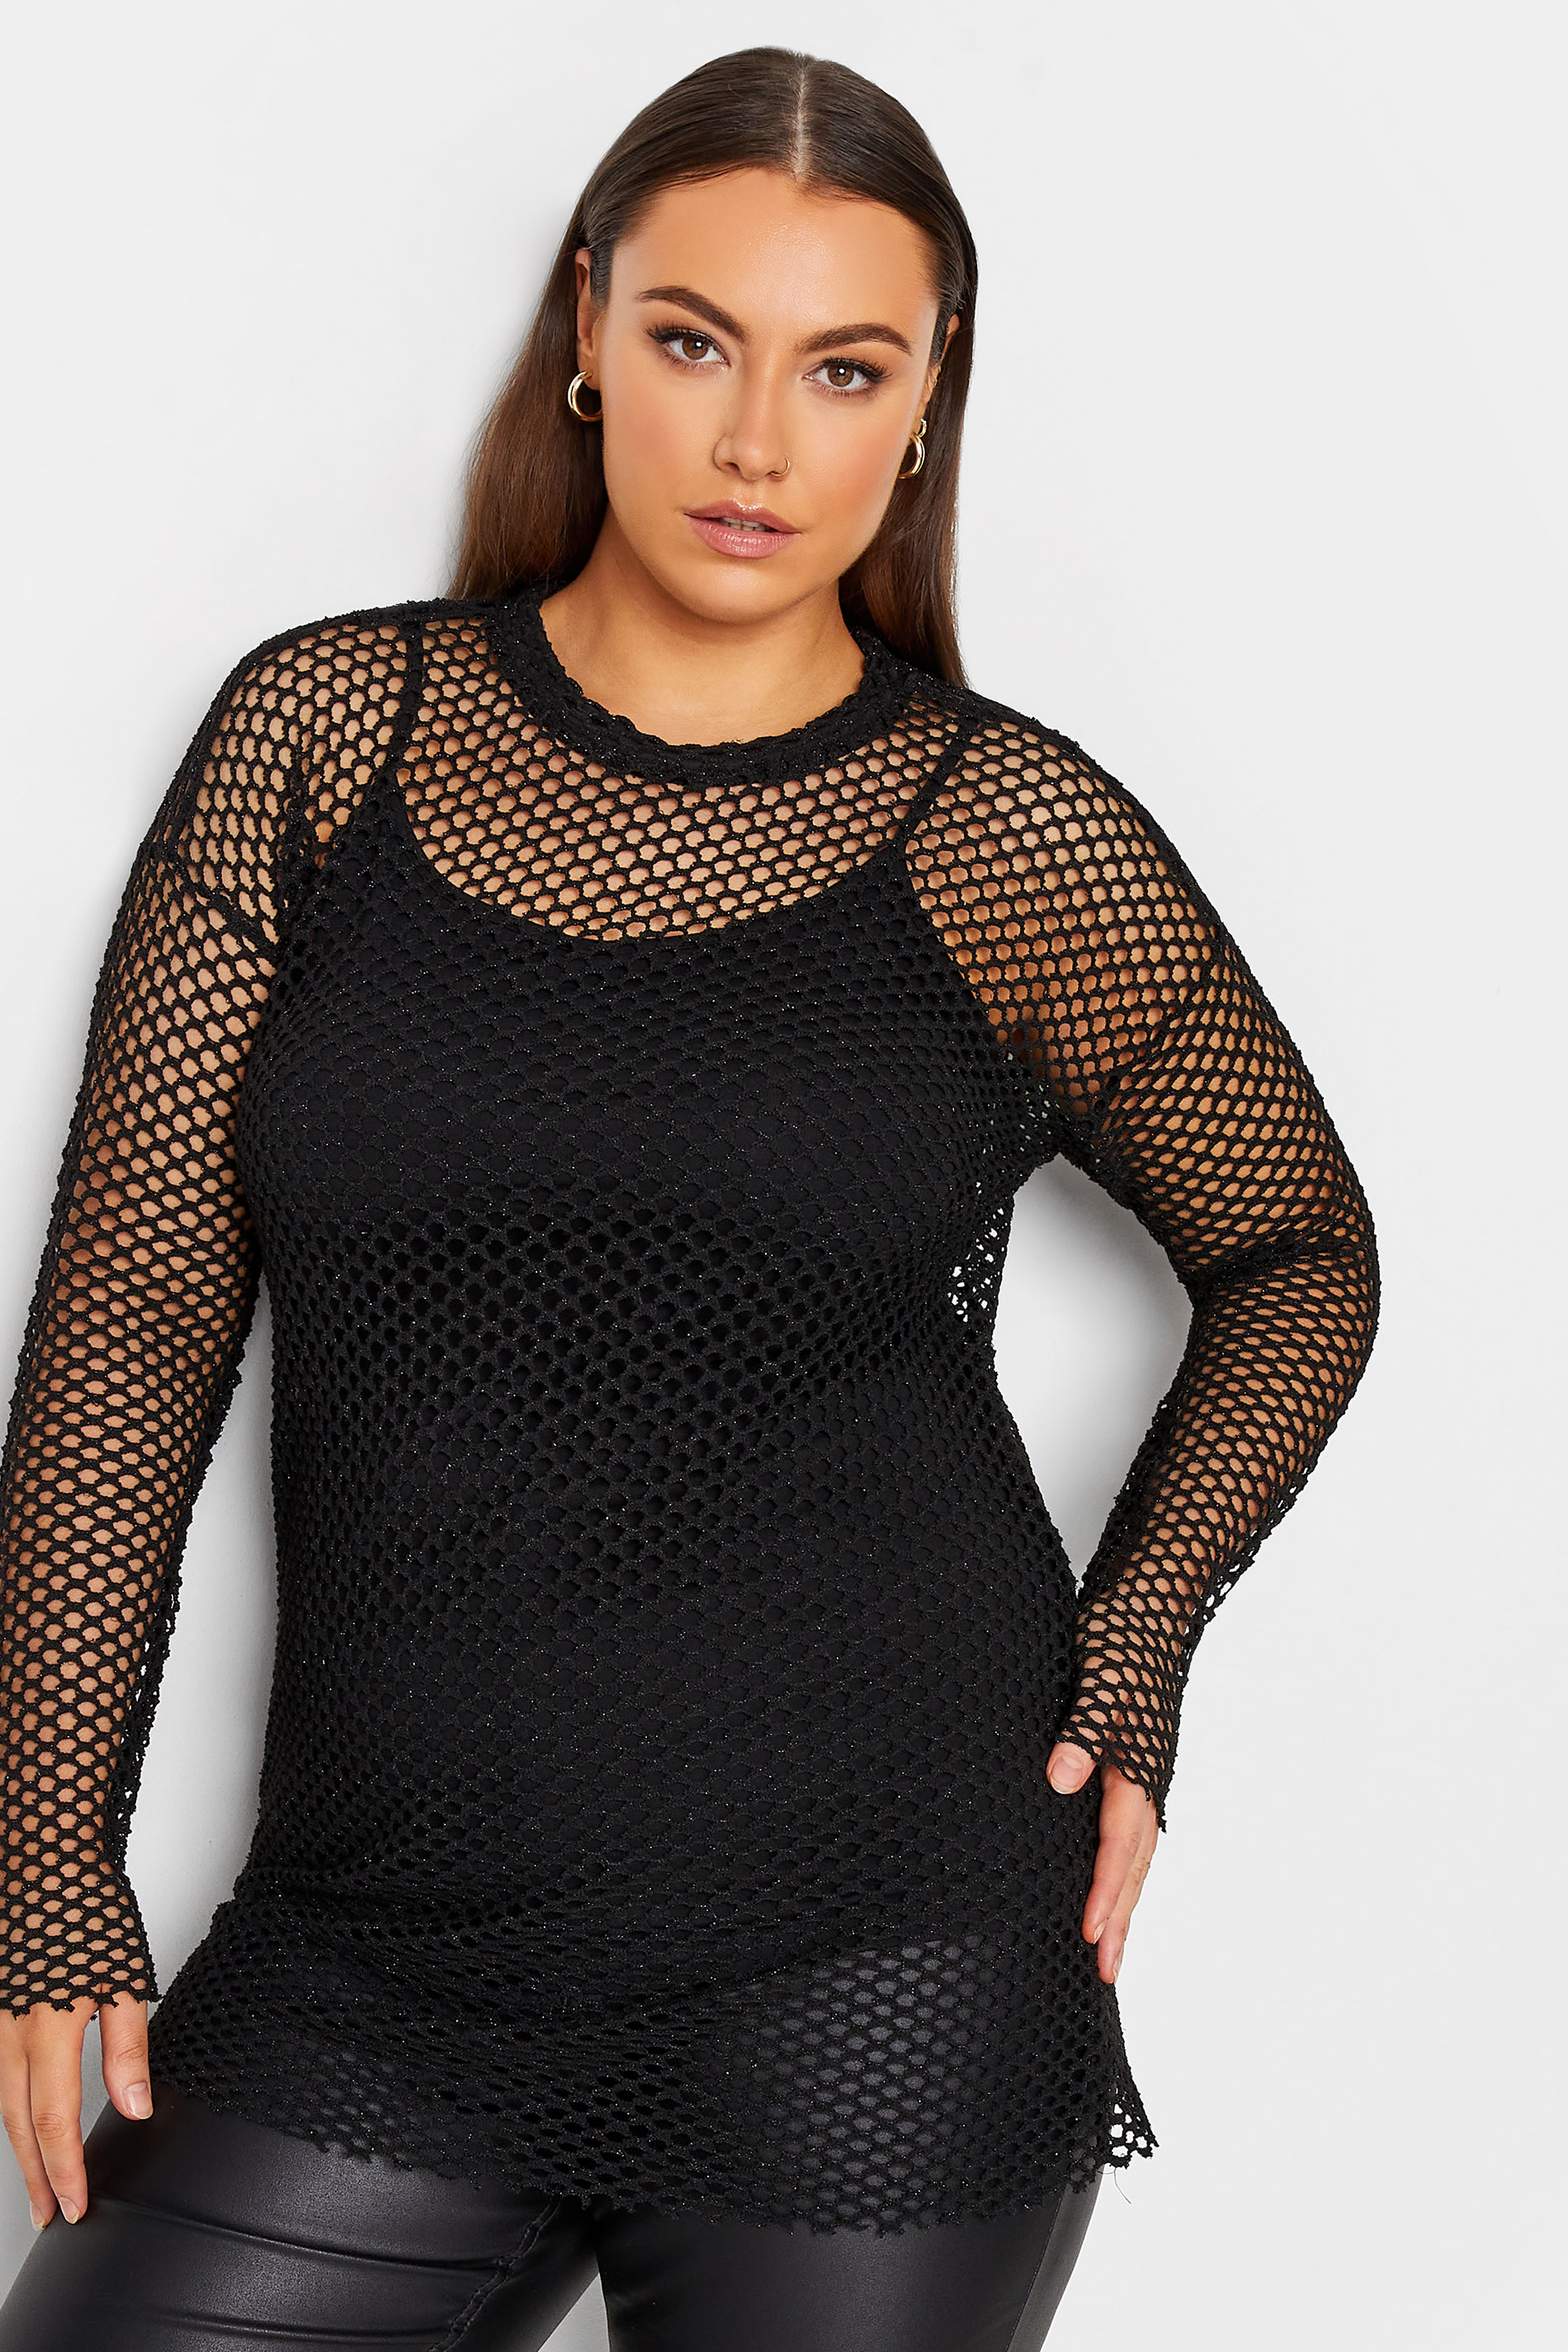 YOURS LUXURY Plus Size Black Open Knit Jumper | Yours Clothing  1